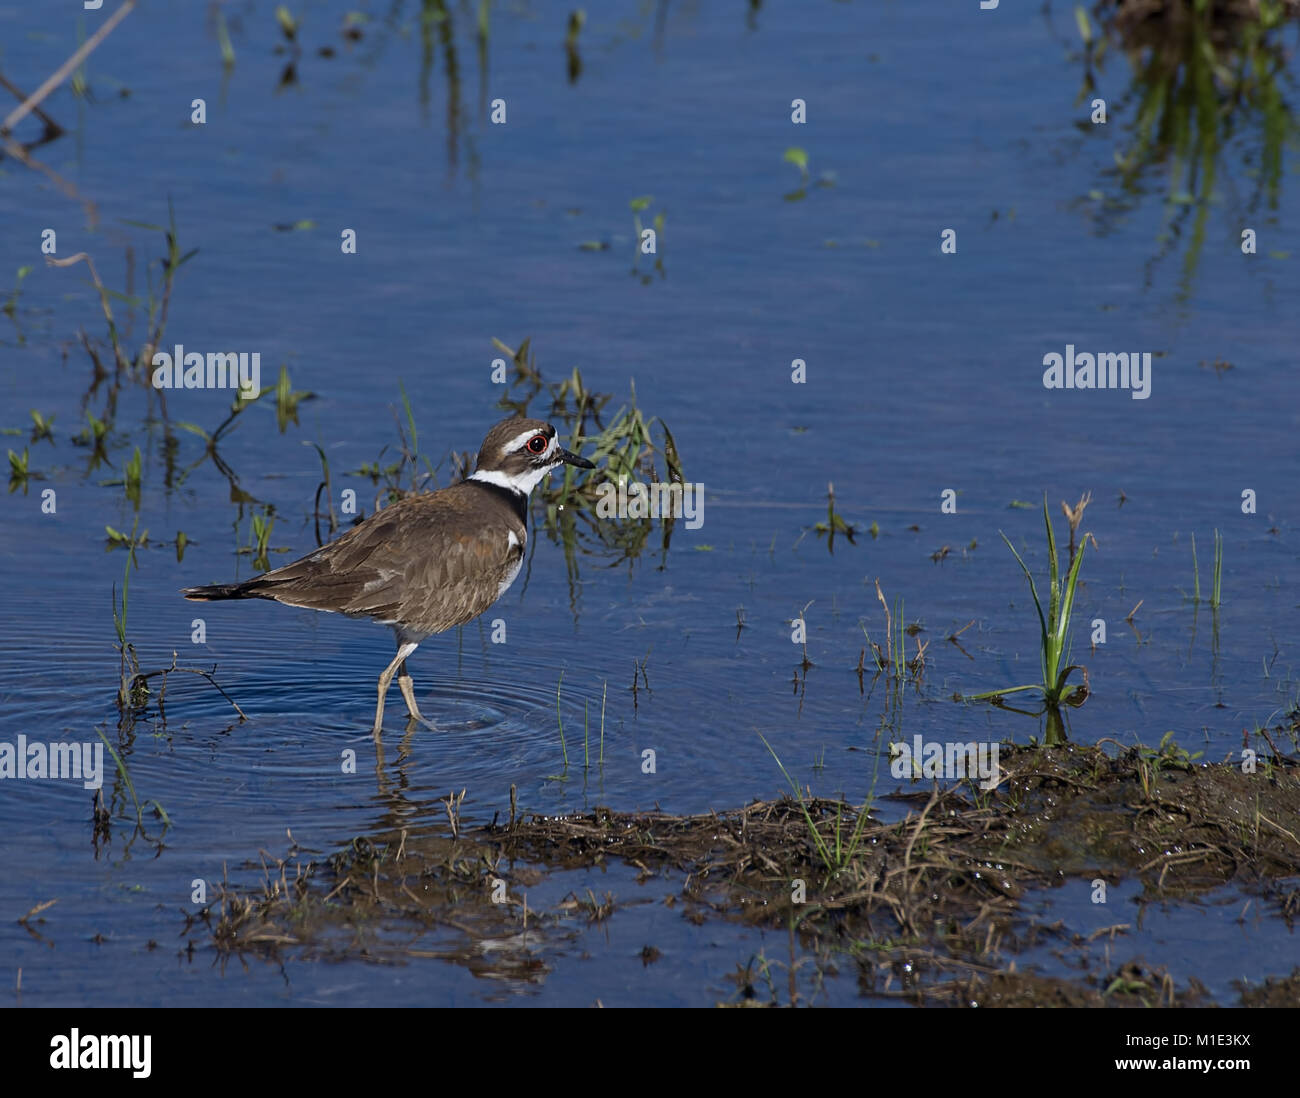 Killdeer wading in shallow water at the edge of a pond Stock Photo